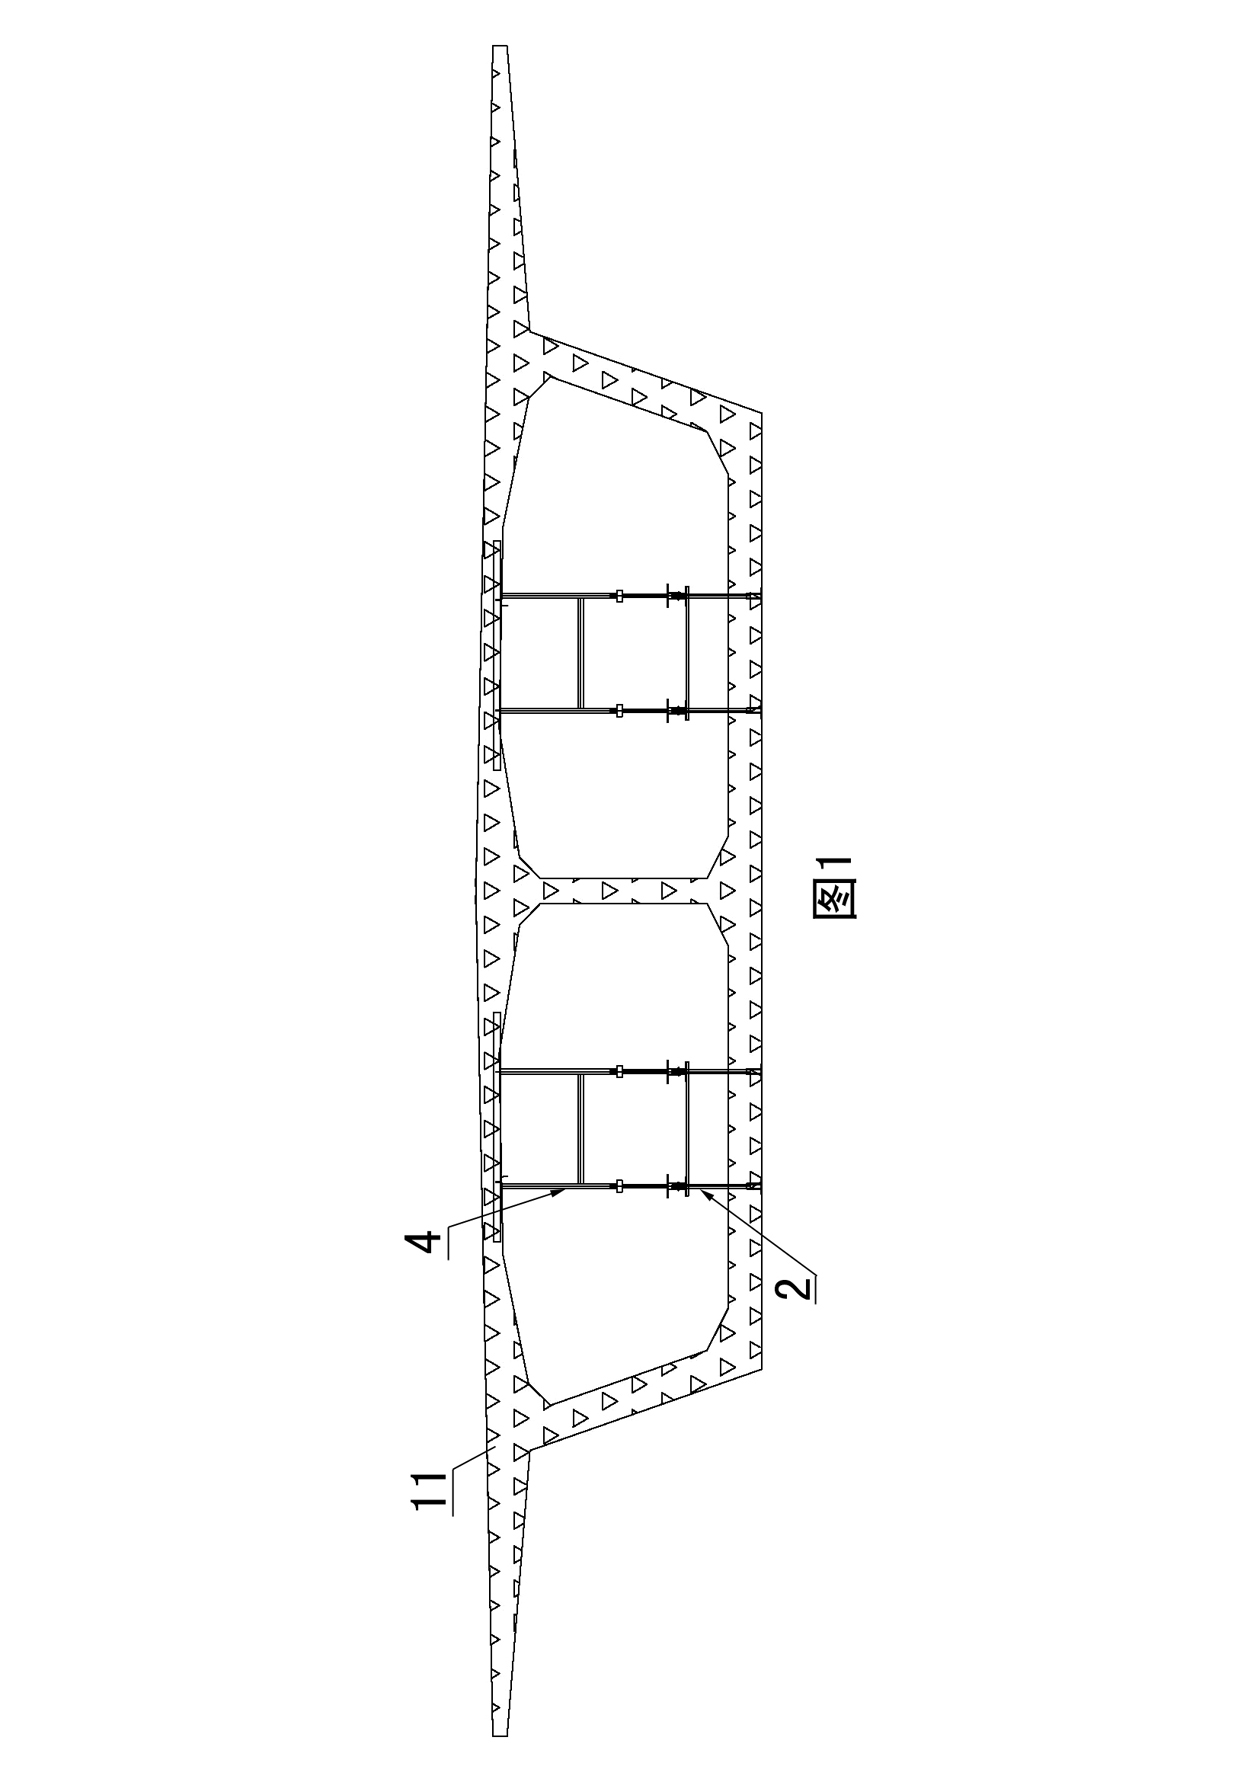 Integrated binding and locating device of single-box double-chamber full span box girder reinforcing steel bar